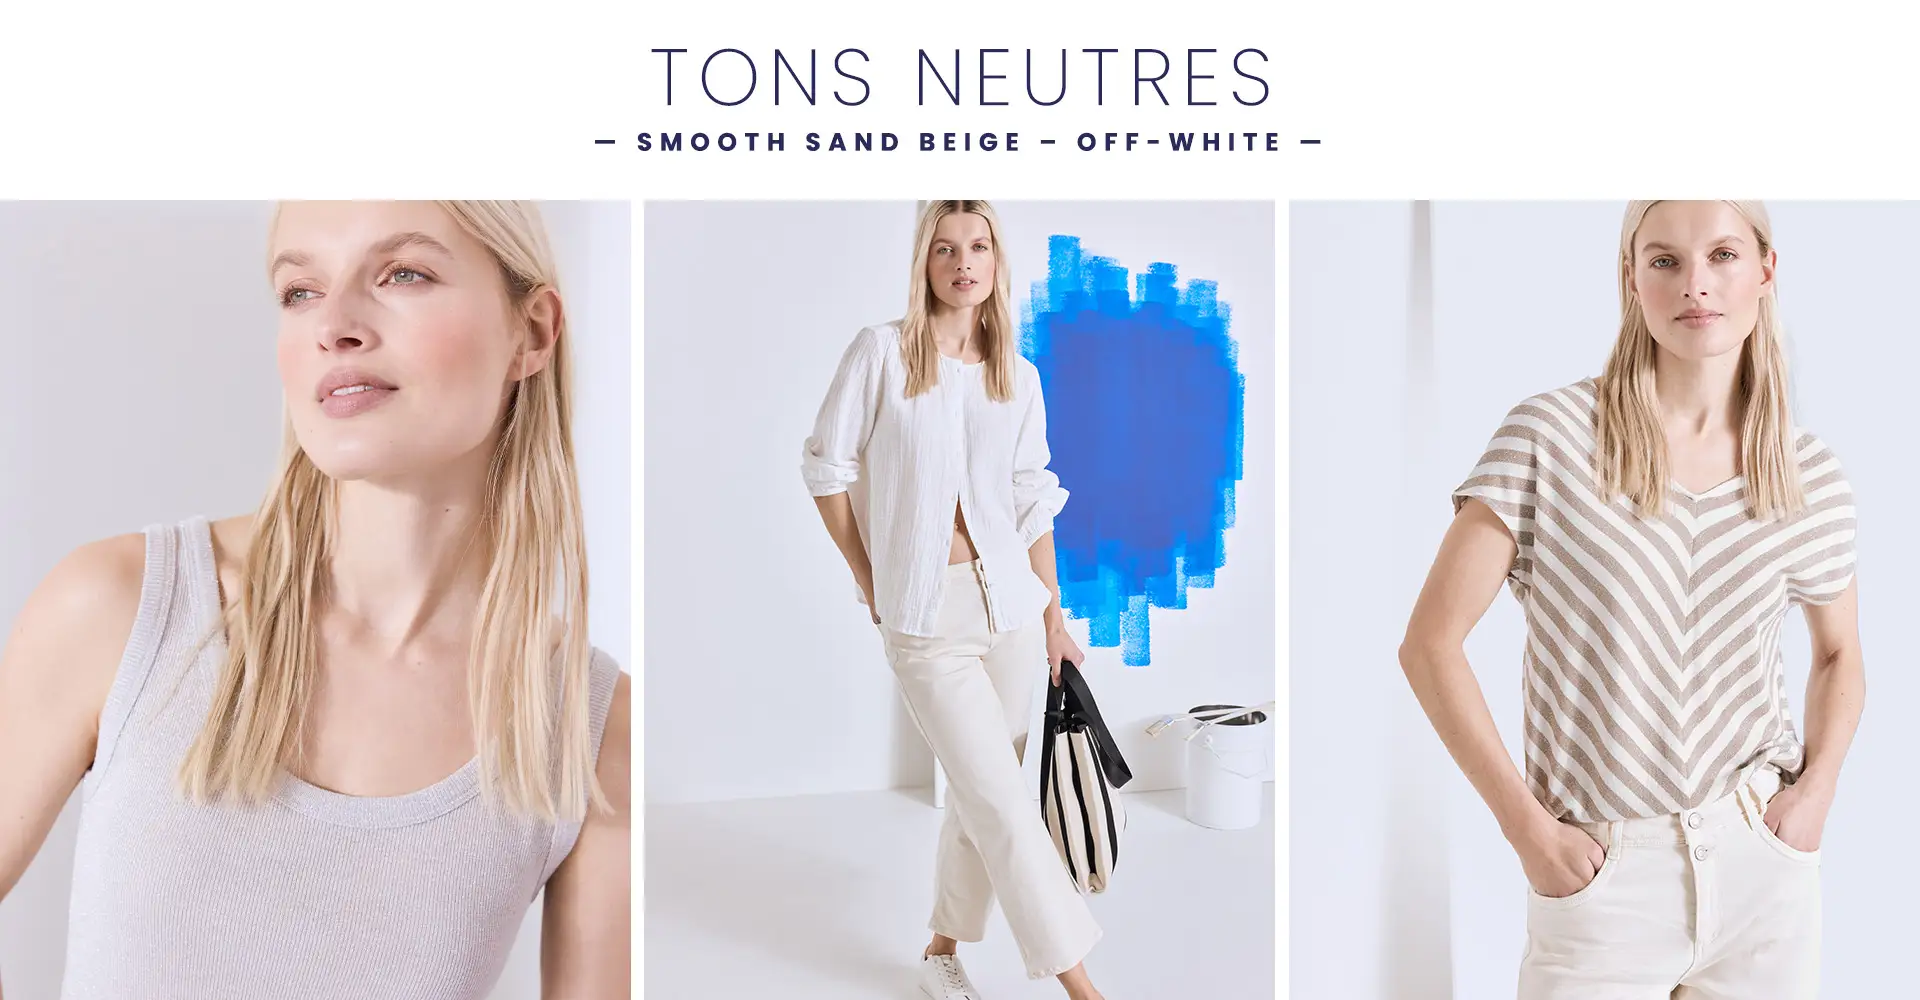 Tons neutres  Smooth sand beige – off-white